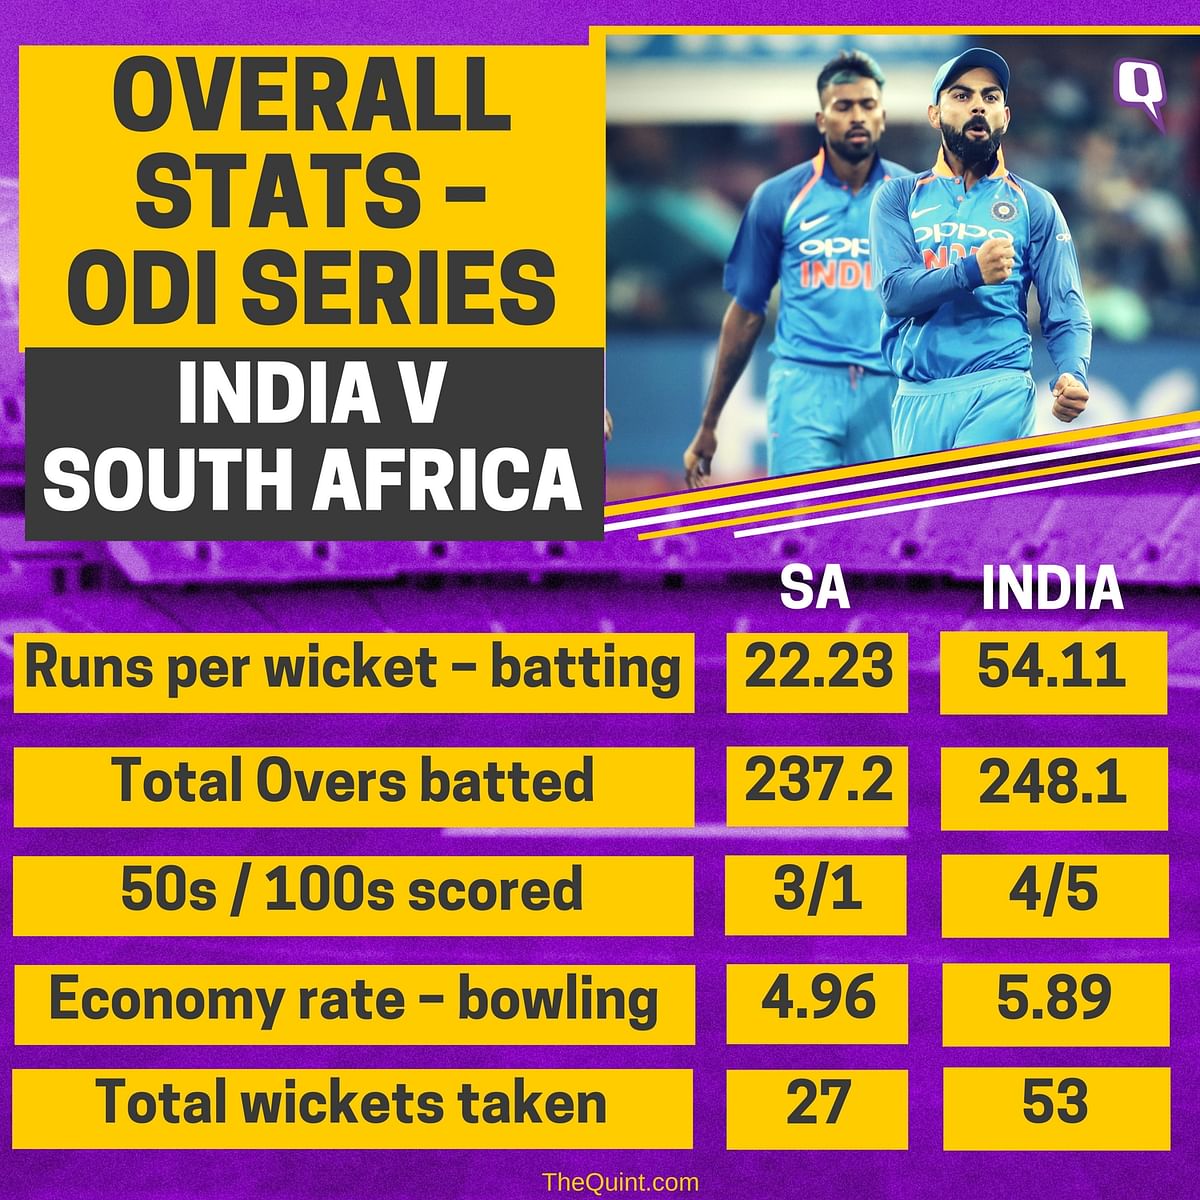 Take a look at the ODI series between India and South Africa through numbers.